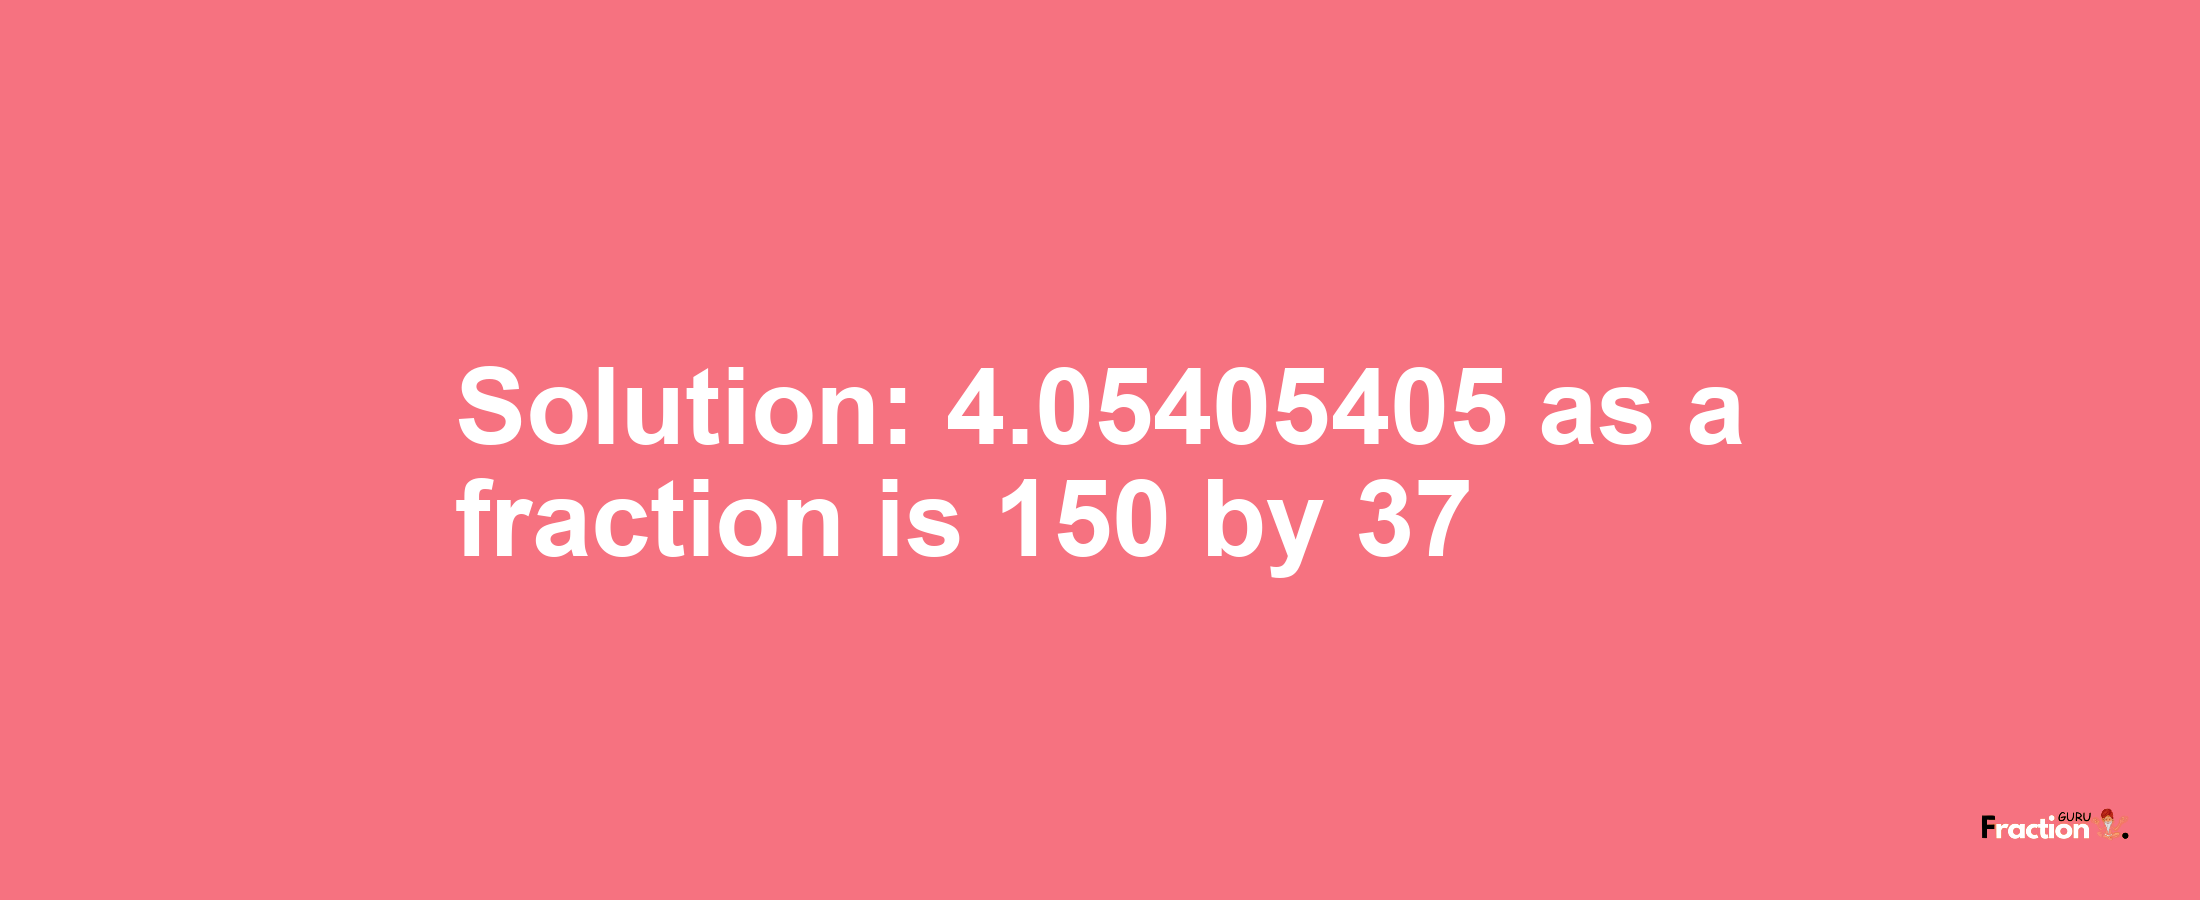 Solution:4.05405405 as a fraction is 150/37